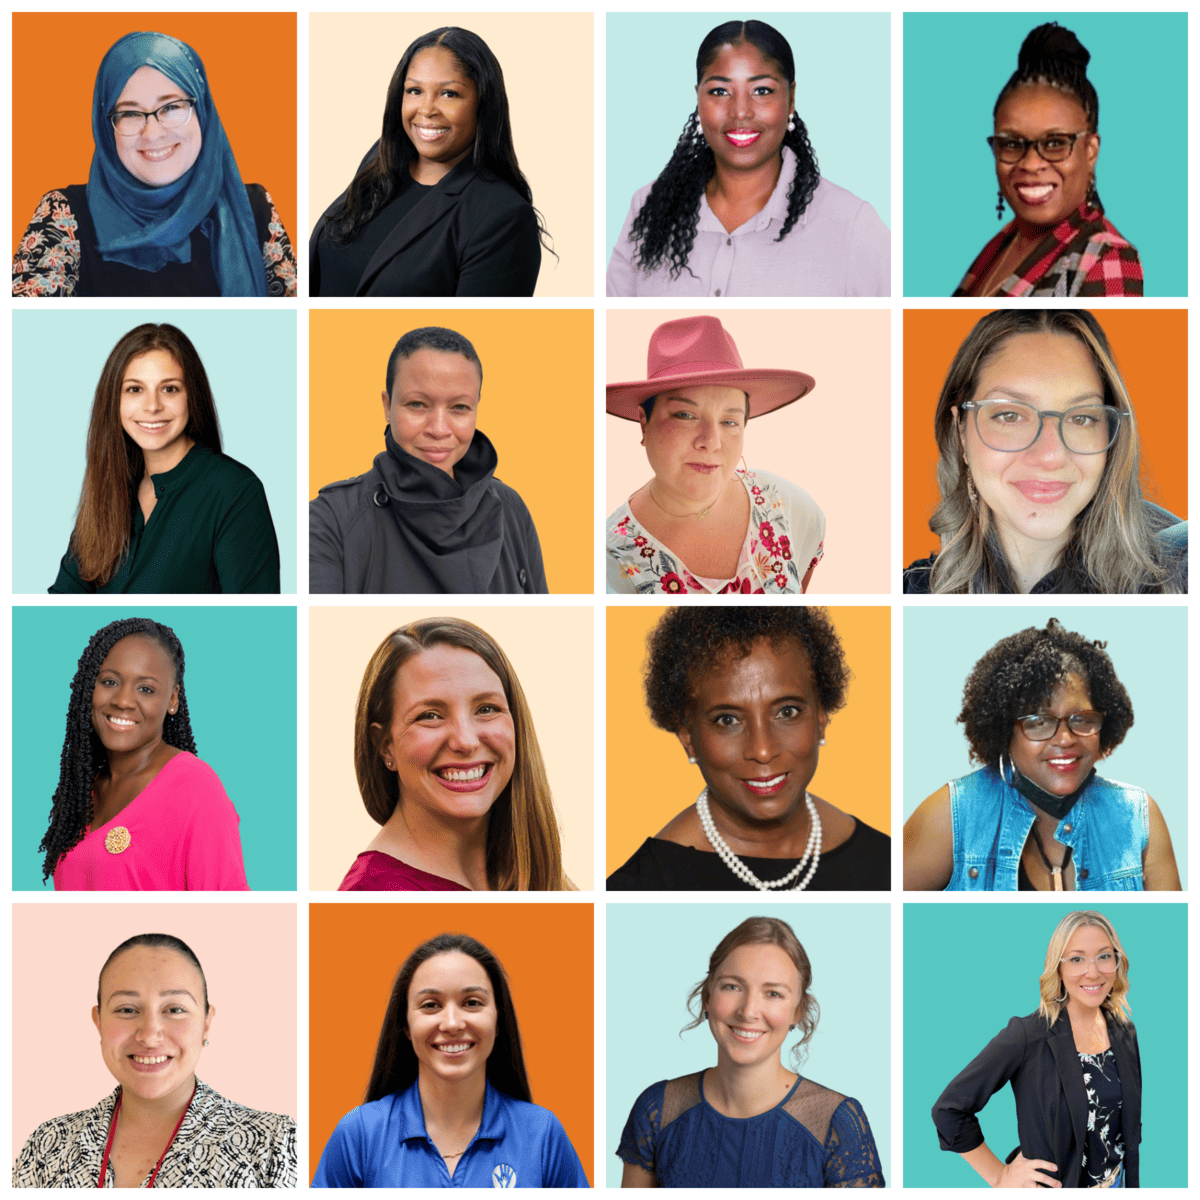 Collage of 16 diverse nonprofit leaders, all female, against vibrant orange, blue and yellow colored backgrounds